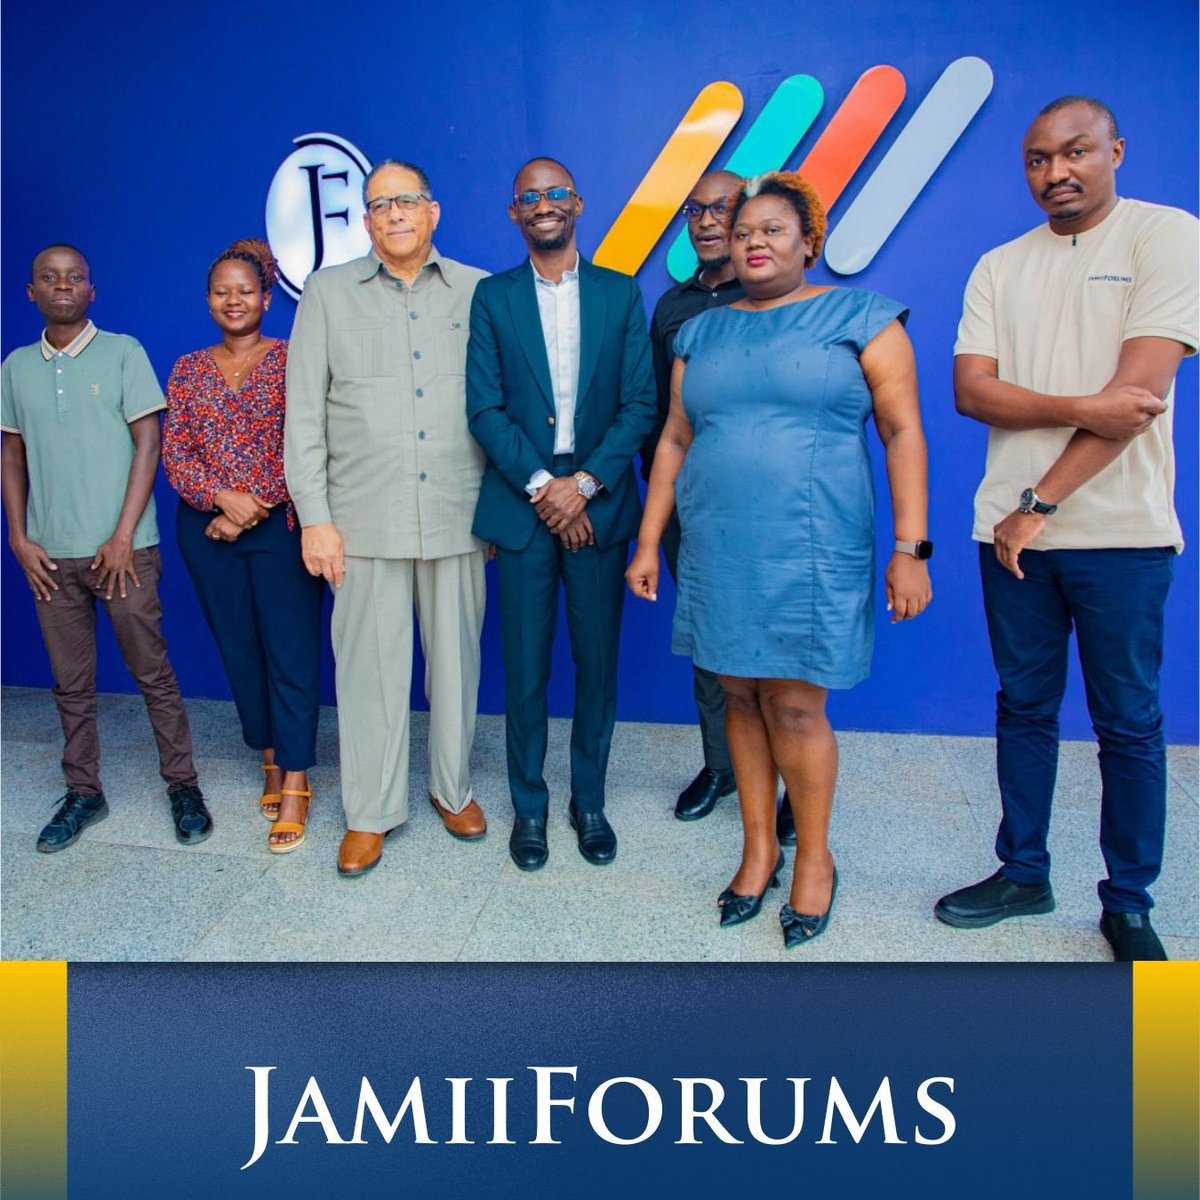 Proud to meet with Maxence Melo and the entire team at Jamii Forums. Democracy rests in good hands when civil society including Jamii Forums empowers citizens to use their voice and share opinions to solve community challenges. #Tukopamoja